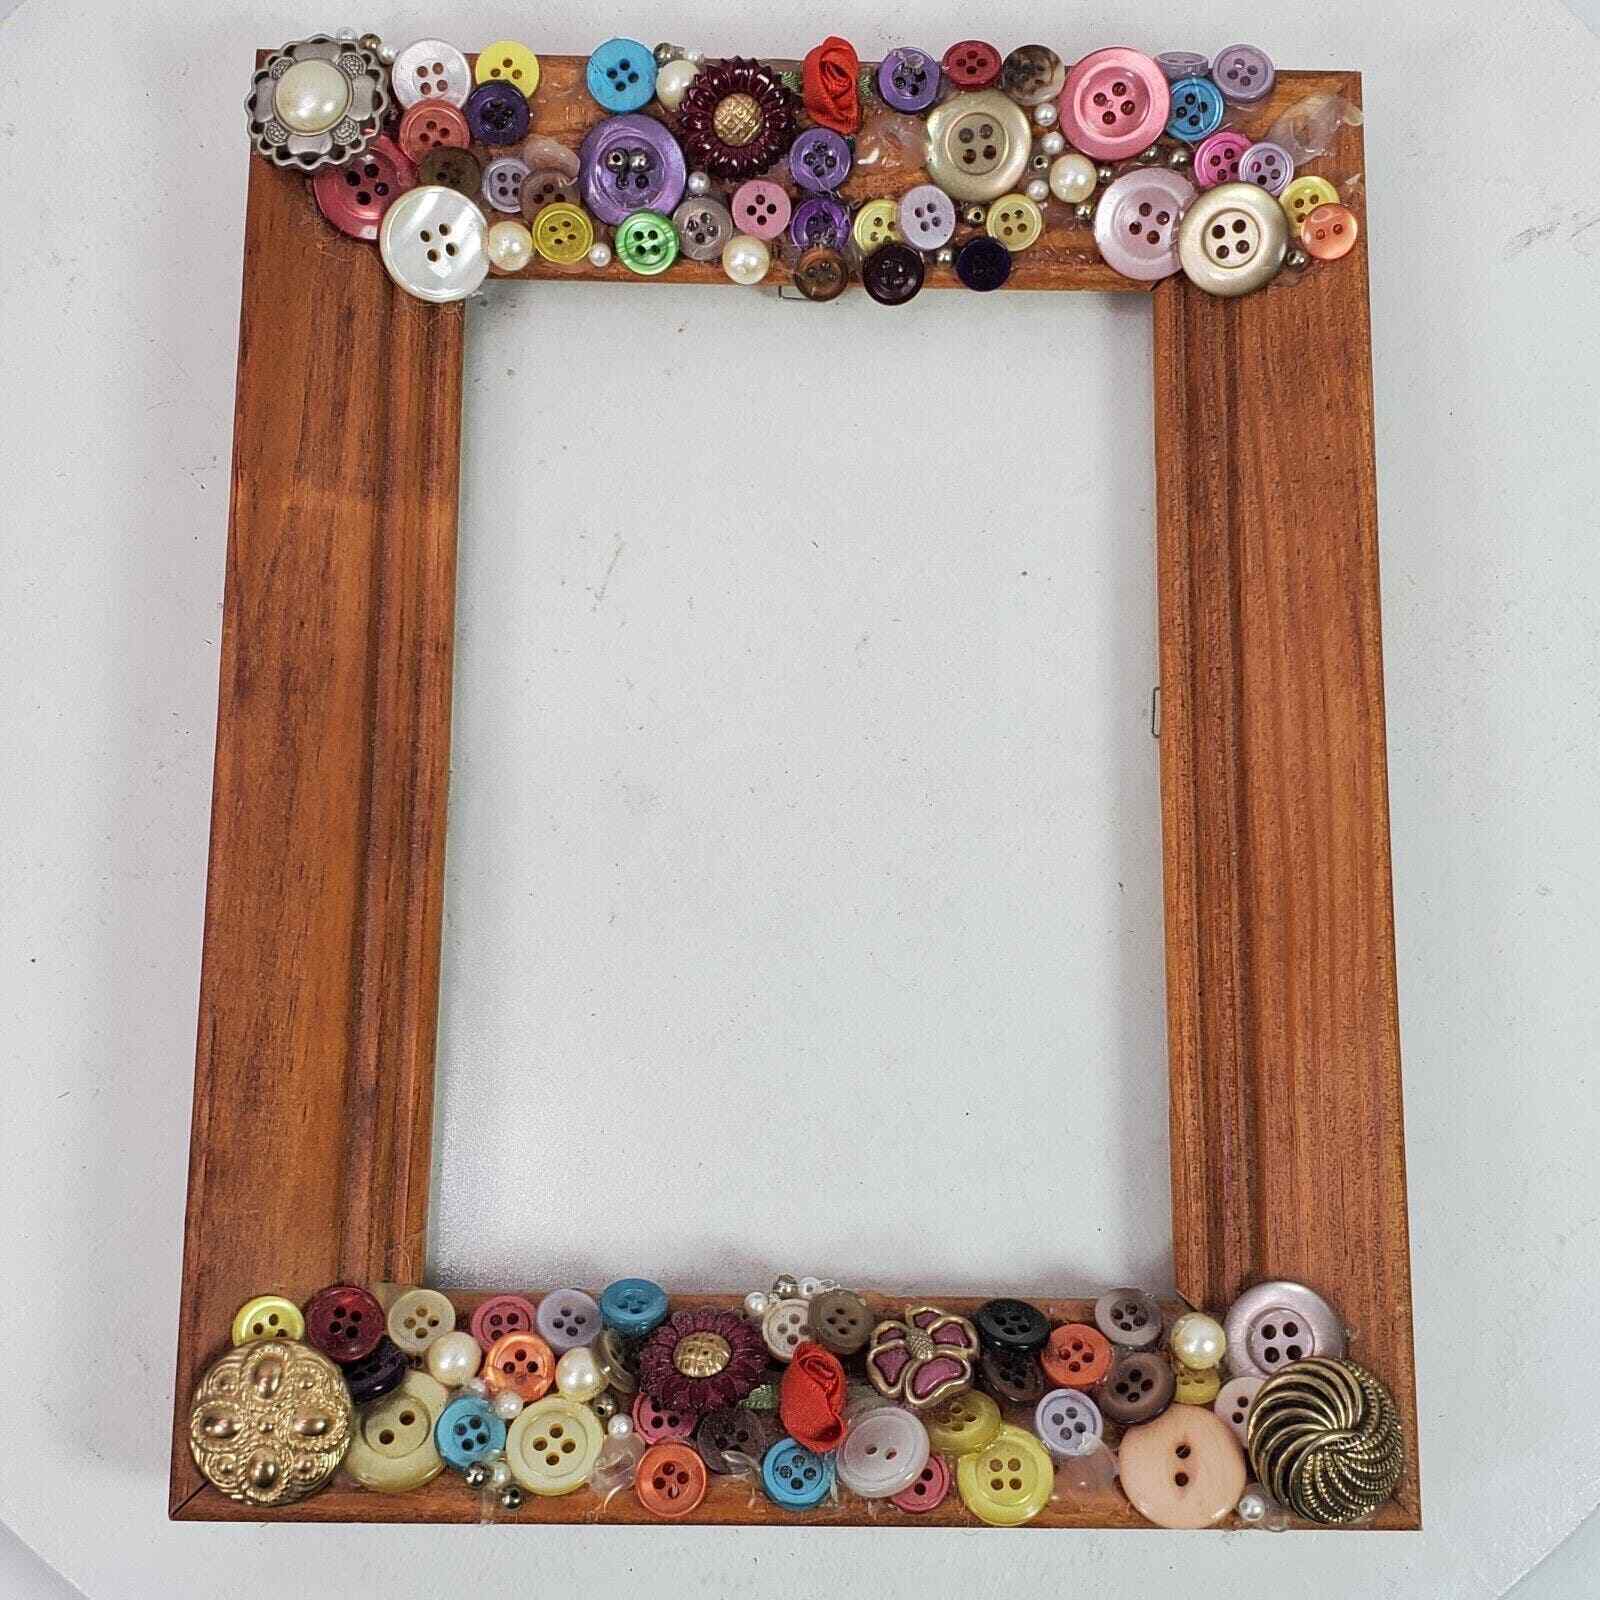 Vintage Handcrafted Button & Wood Frame 7.5x9.5